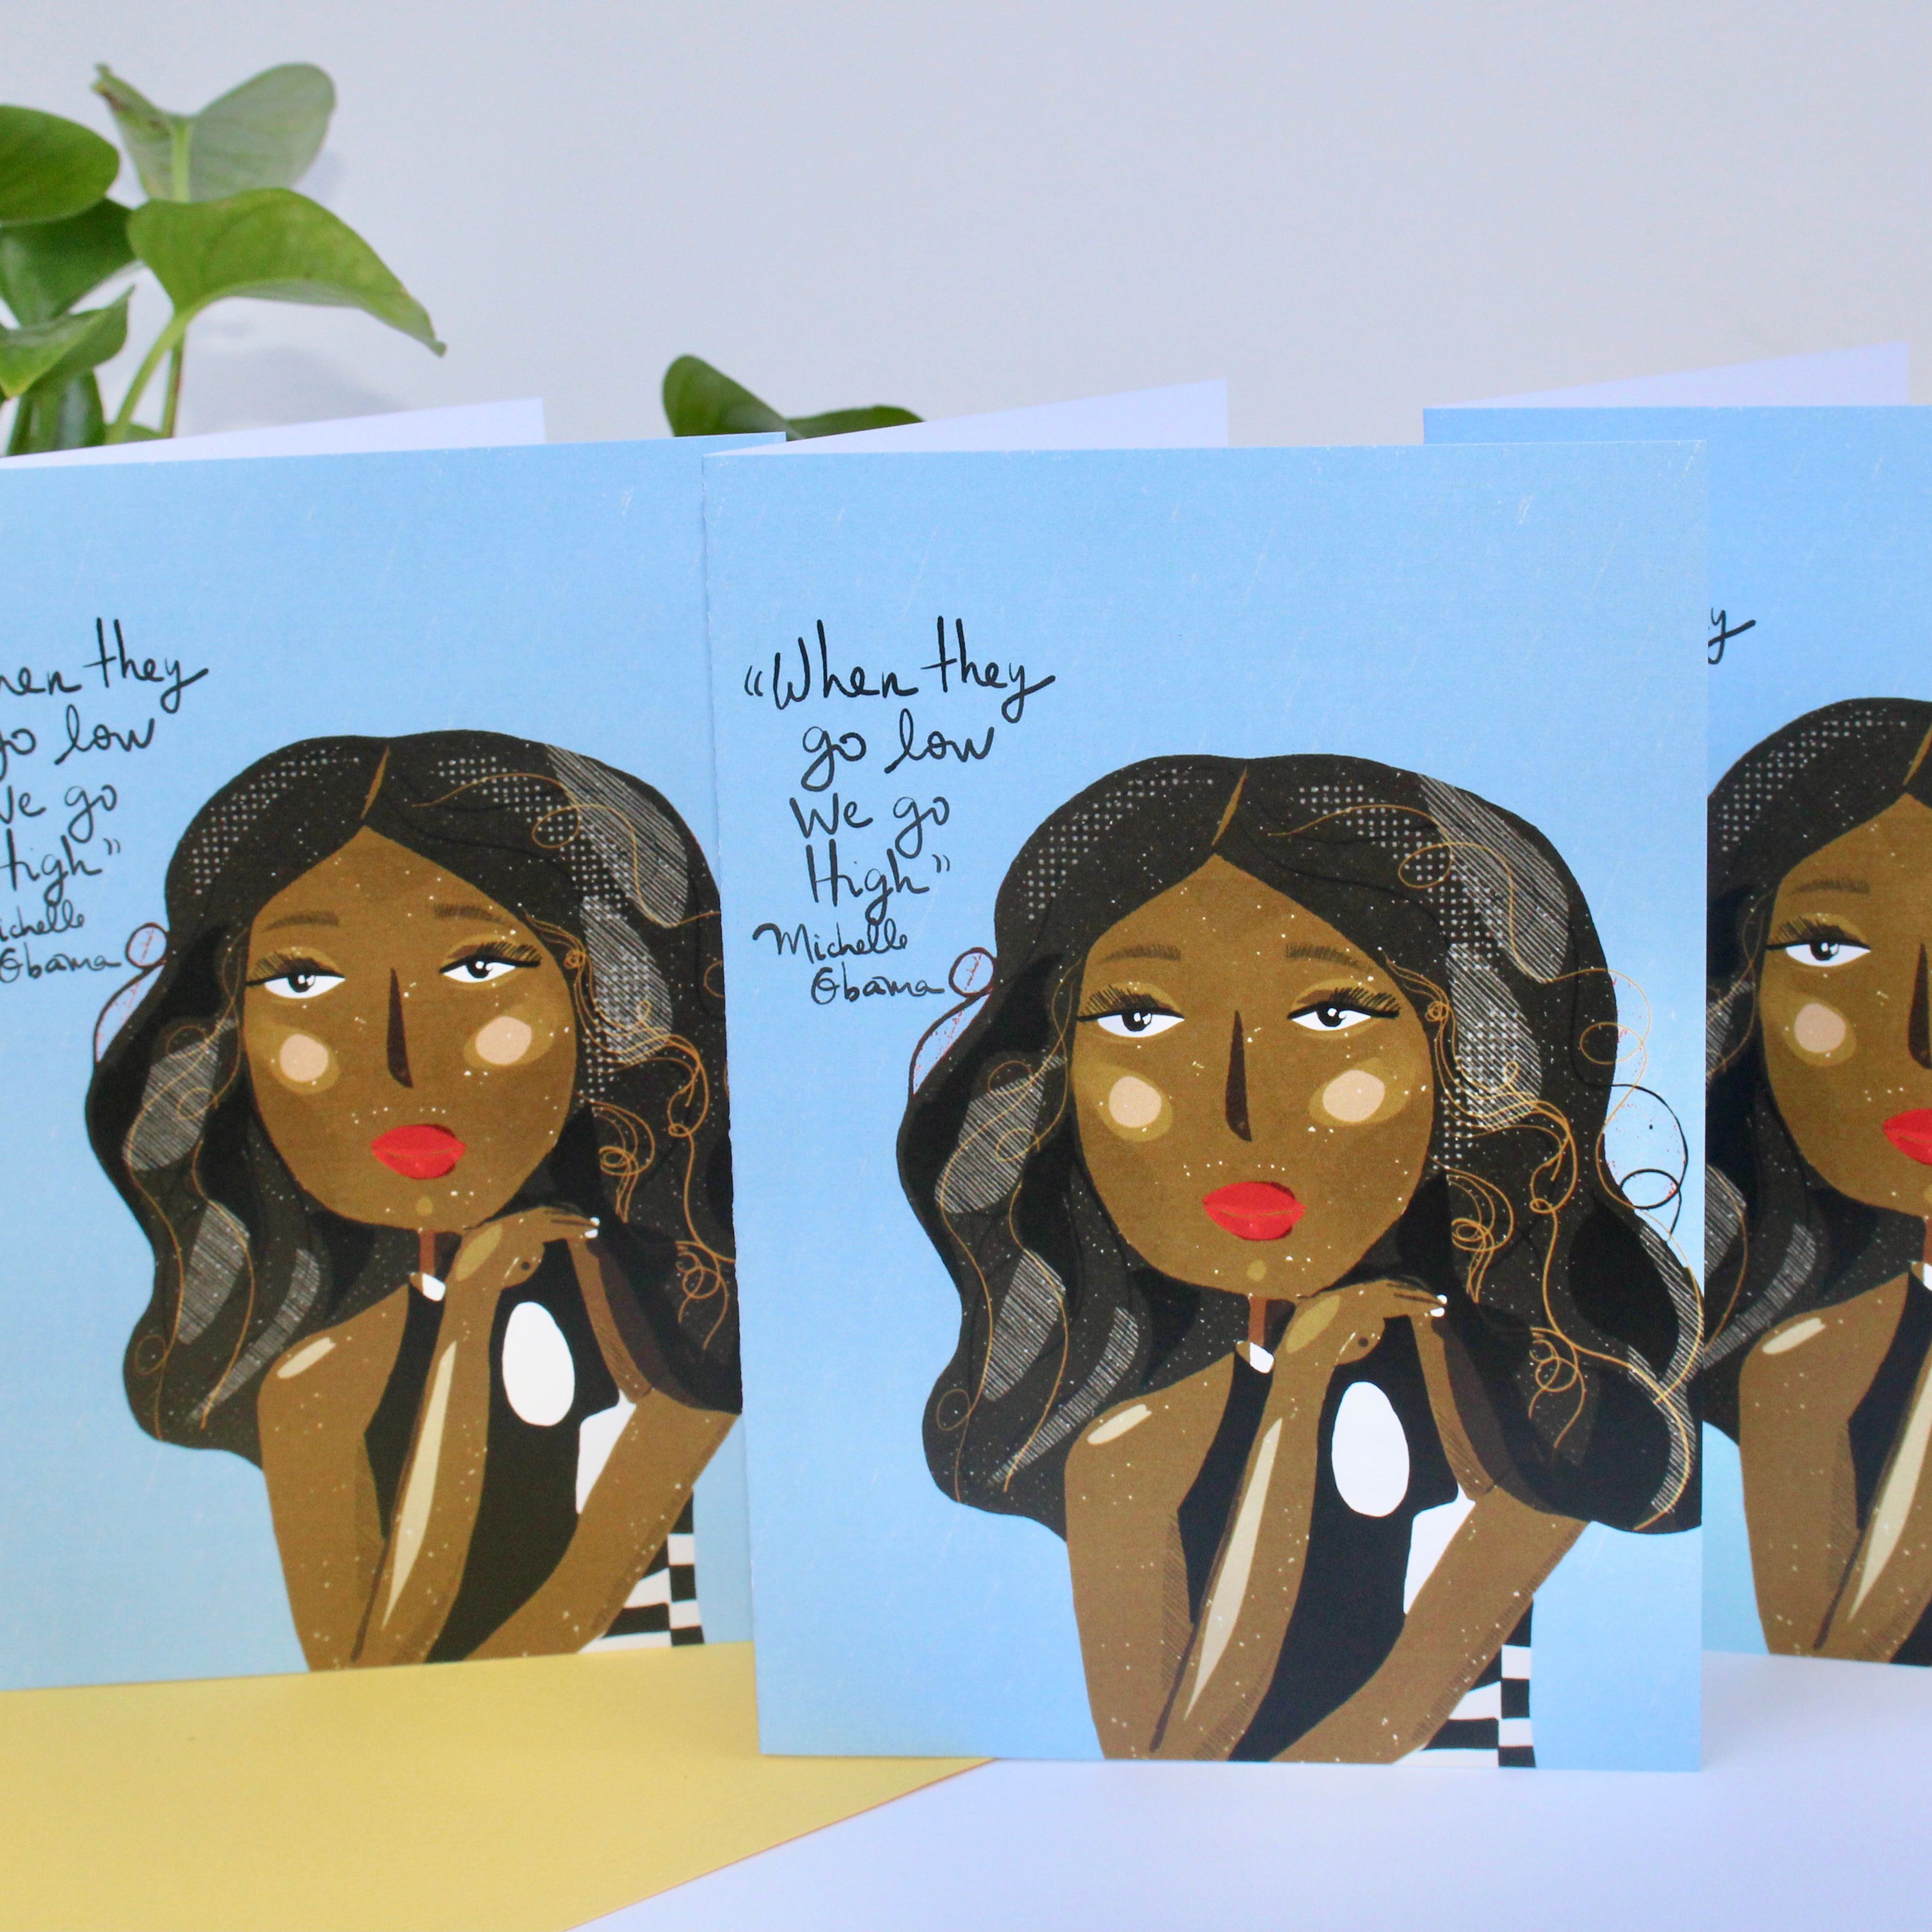 Set of Greeting Cards, Quirky illustration Iconic Women Portrait , Snail Mail, set of 6